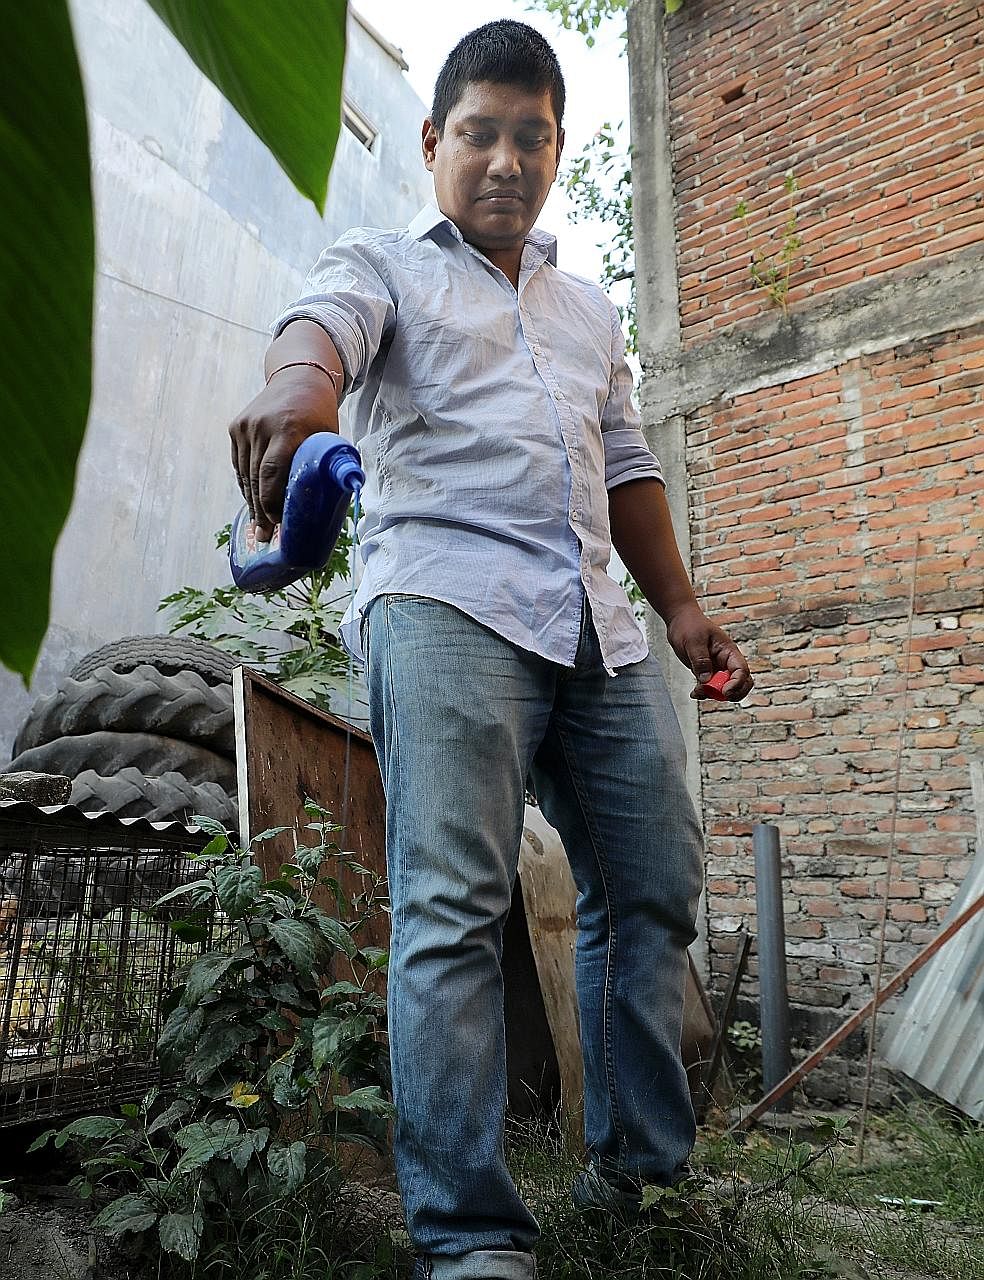 Mr Rana pouring cleaning detergent into a pool of stagnant water at the back of his home, as a preventive measure against mosquito breeding.